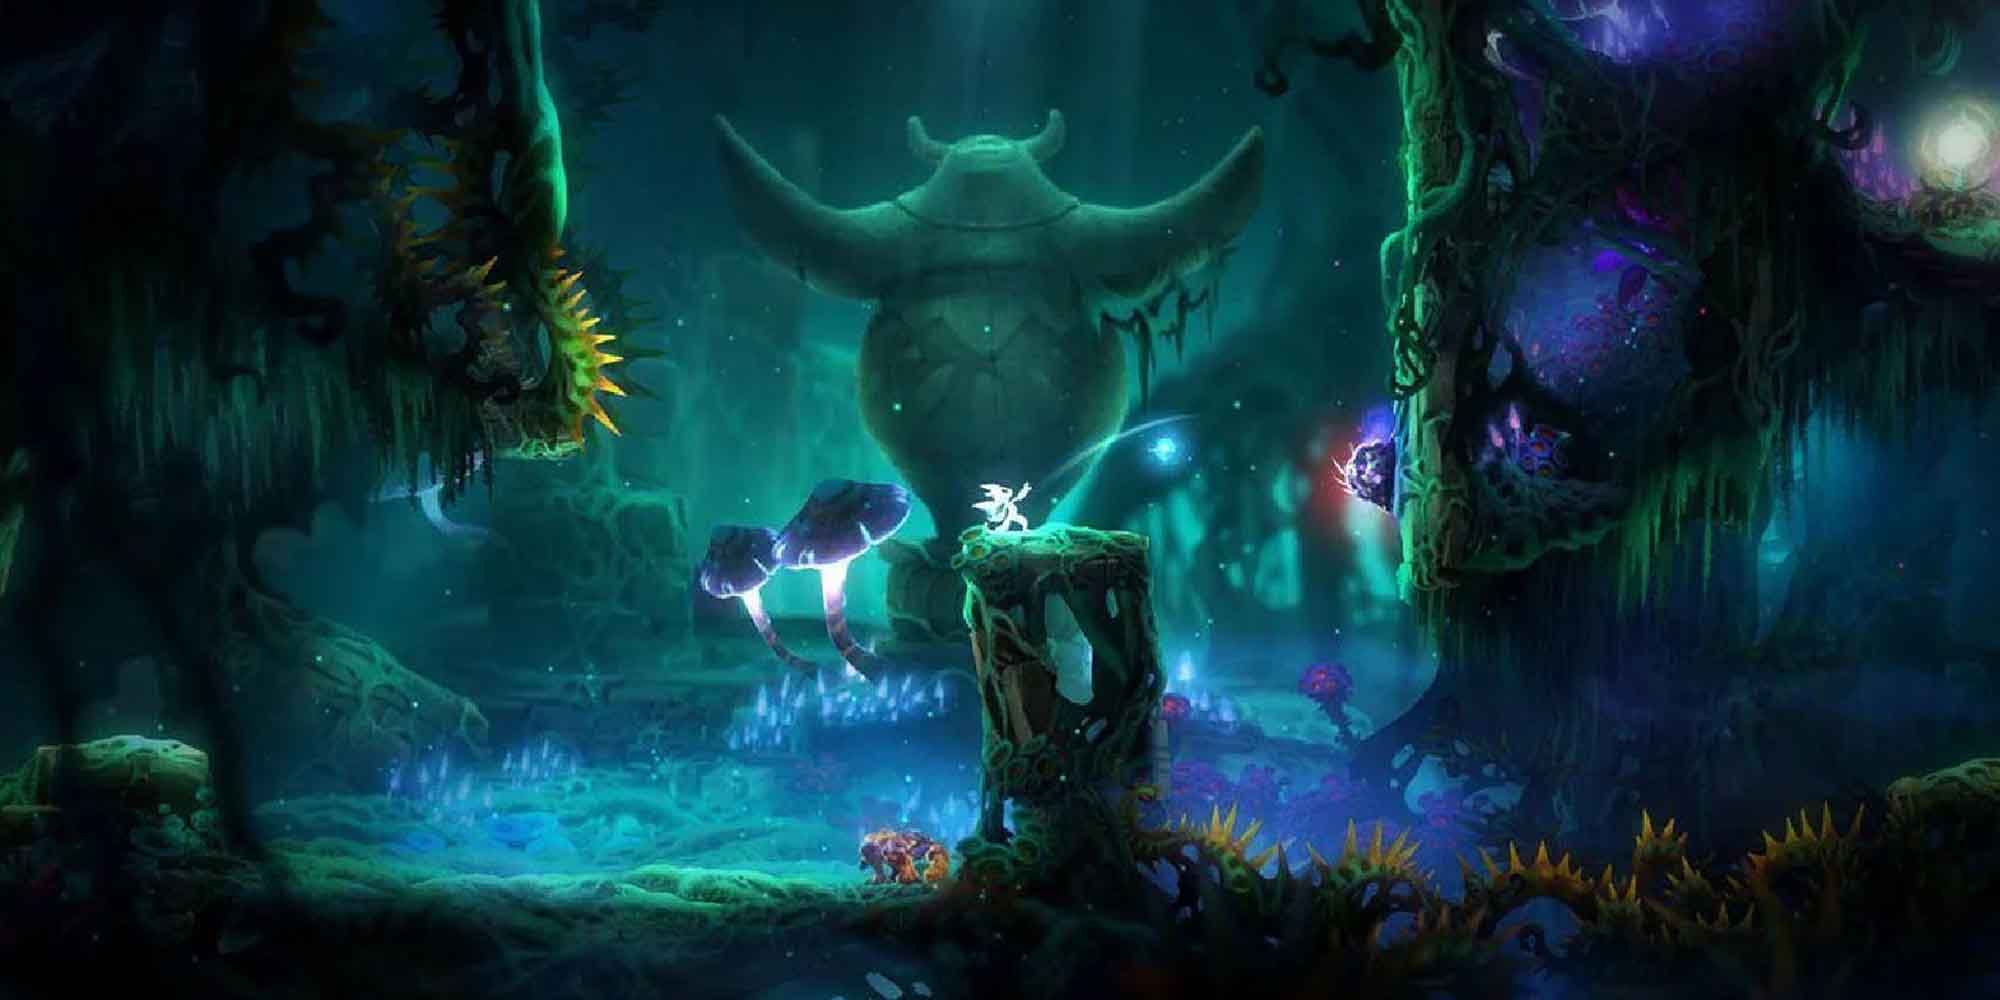 Exploring the dark yet colorful forest in Ori and the Blind Forest